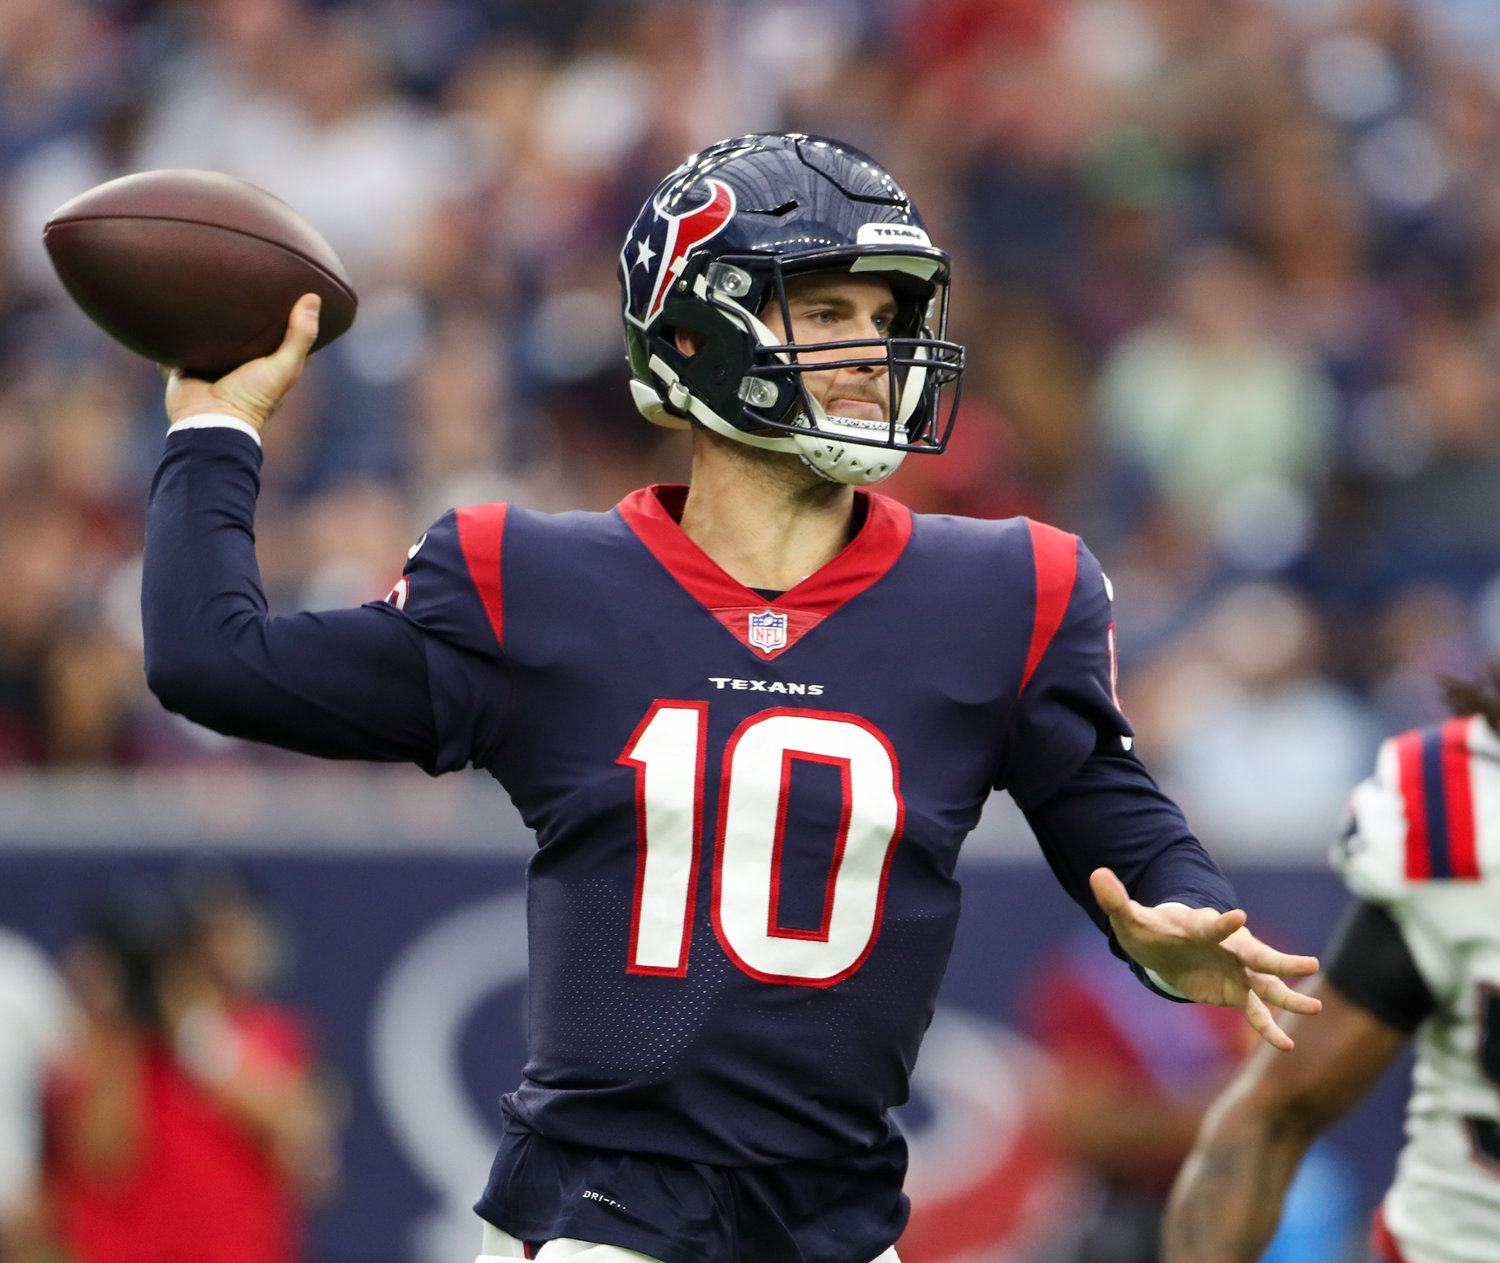 Houston Texans quarterback Davis Mills (10) passes the ball during an NFL game between Houston and New England on October 10, 2021 in Houston, Texas. The Patriots won 25-22.